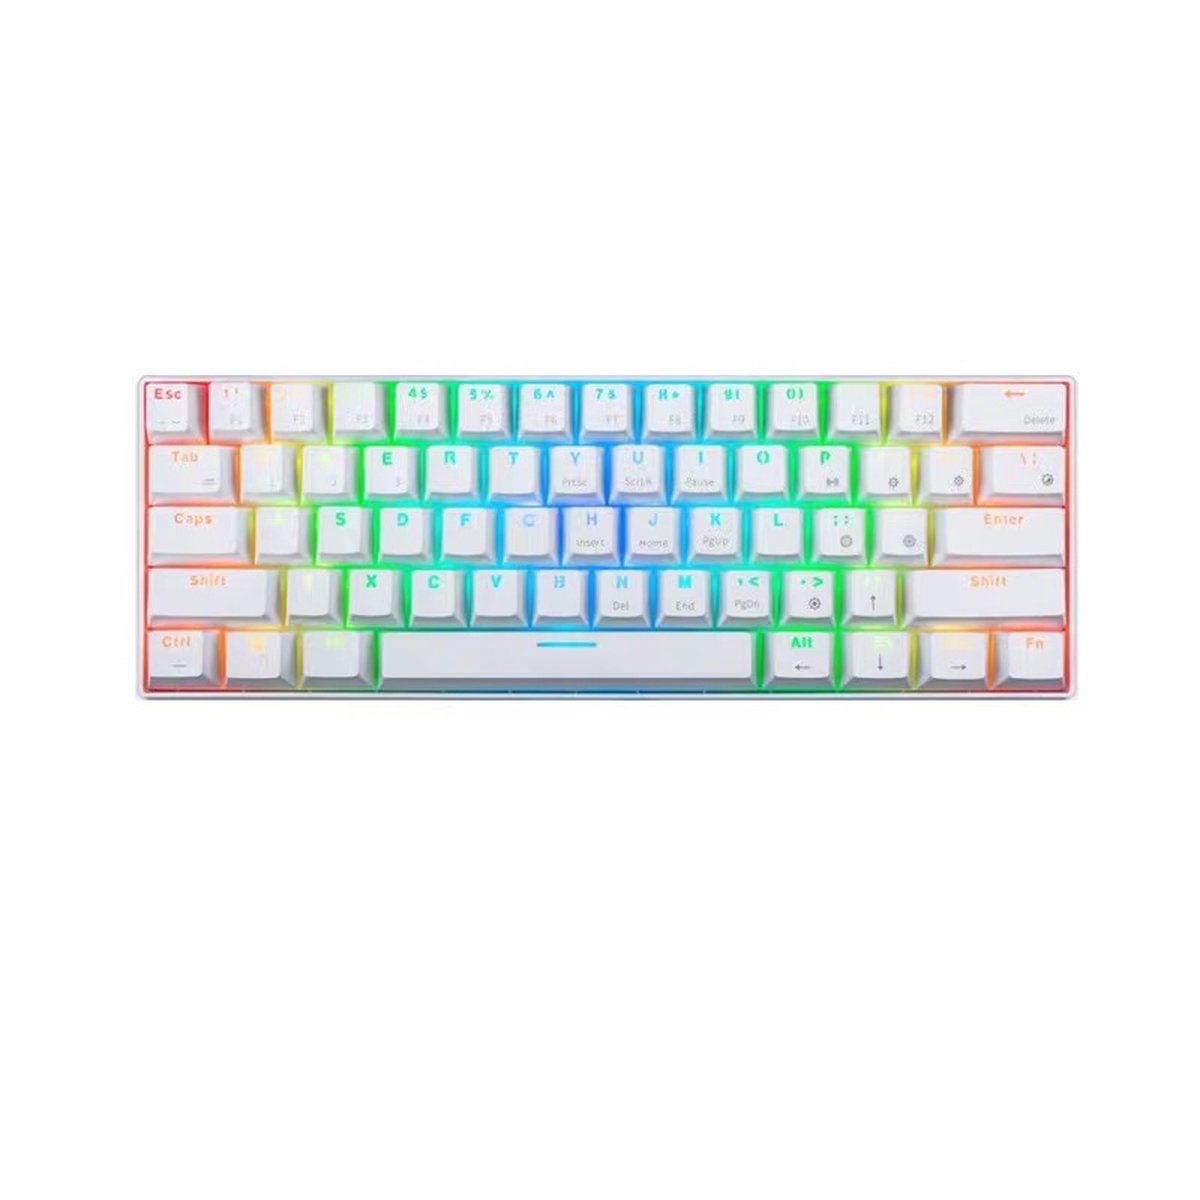 MCBOSON RGB Mechanisch Gaming Toetsenbord met 61 Keys - Red Switches - Draadloos - Ergonomisch Mechanical Gaming Keyboard - Foam Touch - USB - Hot Swappable Switch - Wit